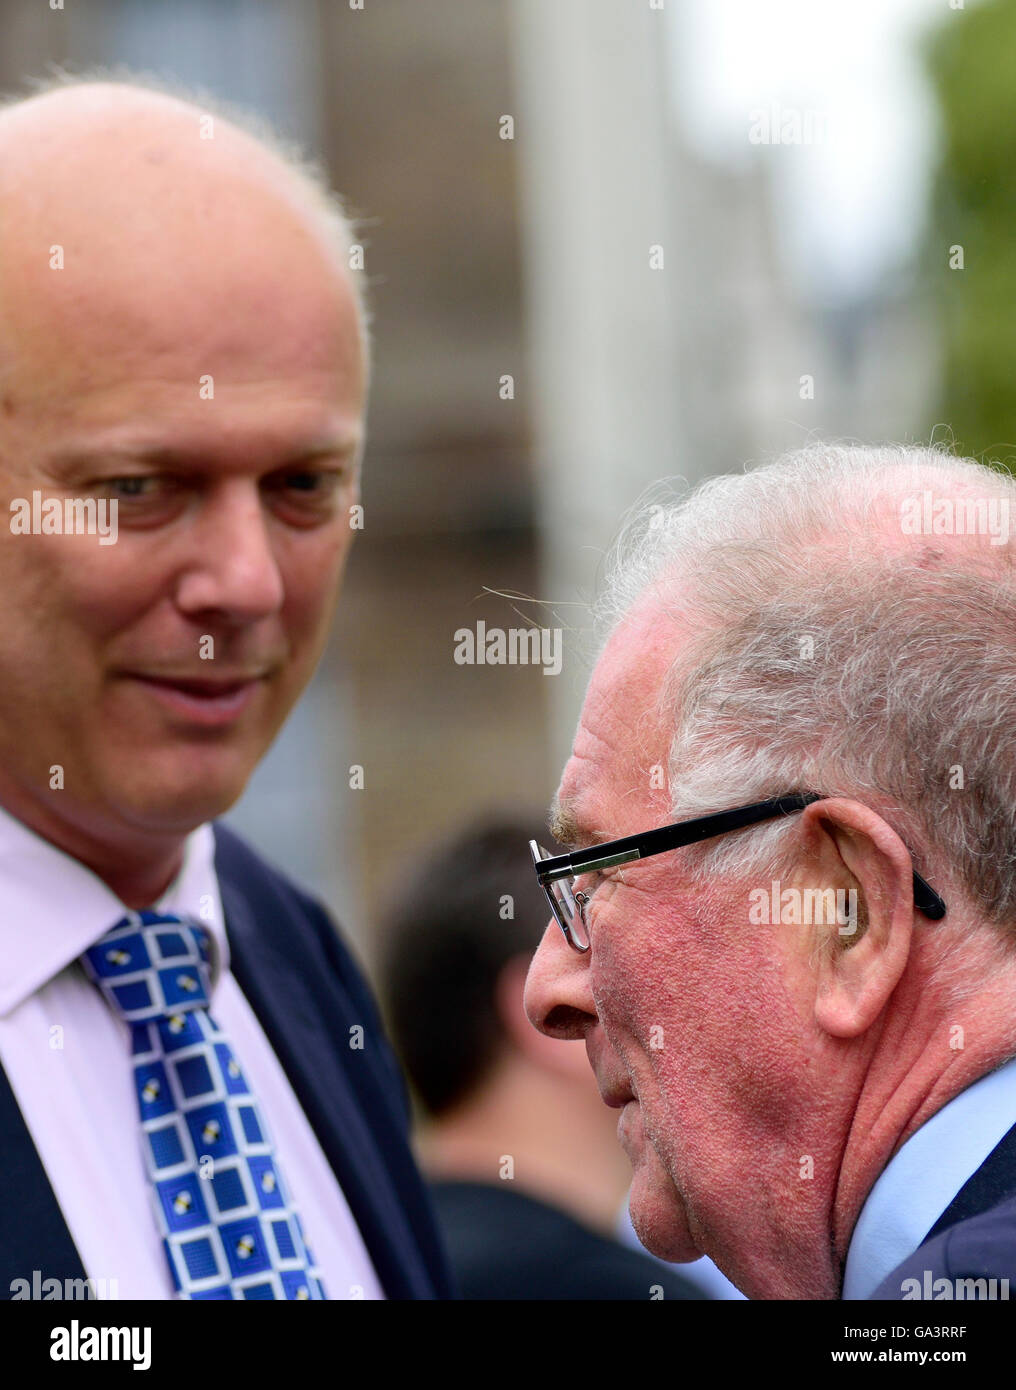 Sir Roger Gale MP (Con: North Thanet) talking to Chris Grayling MP (Con: Epsom and Ewell), College Green, Westminster, June 2016 Stock Photo